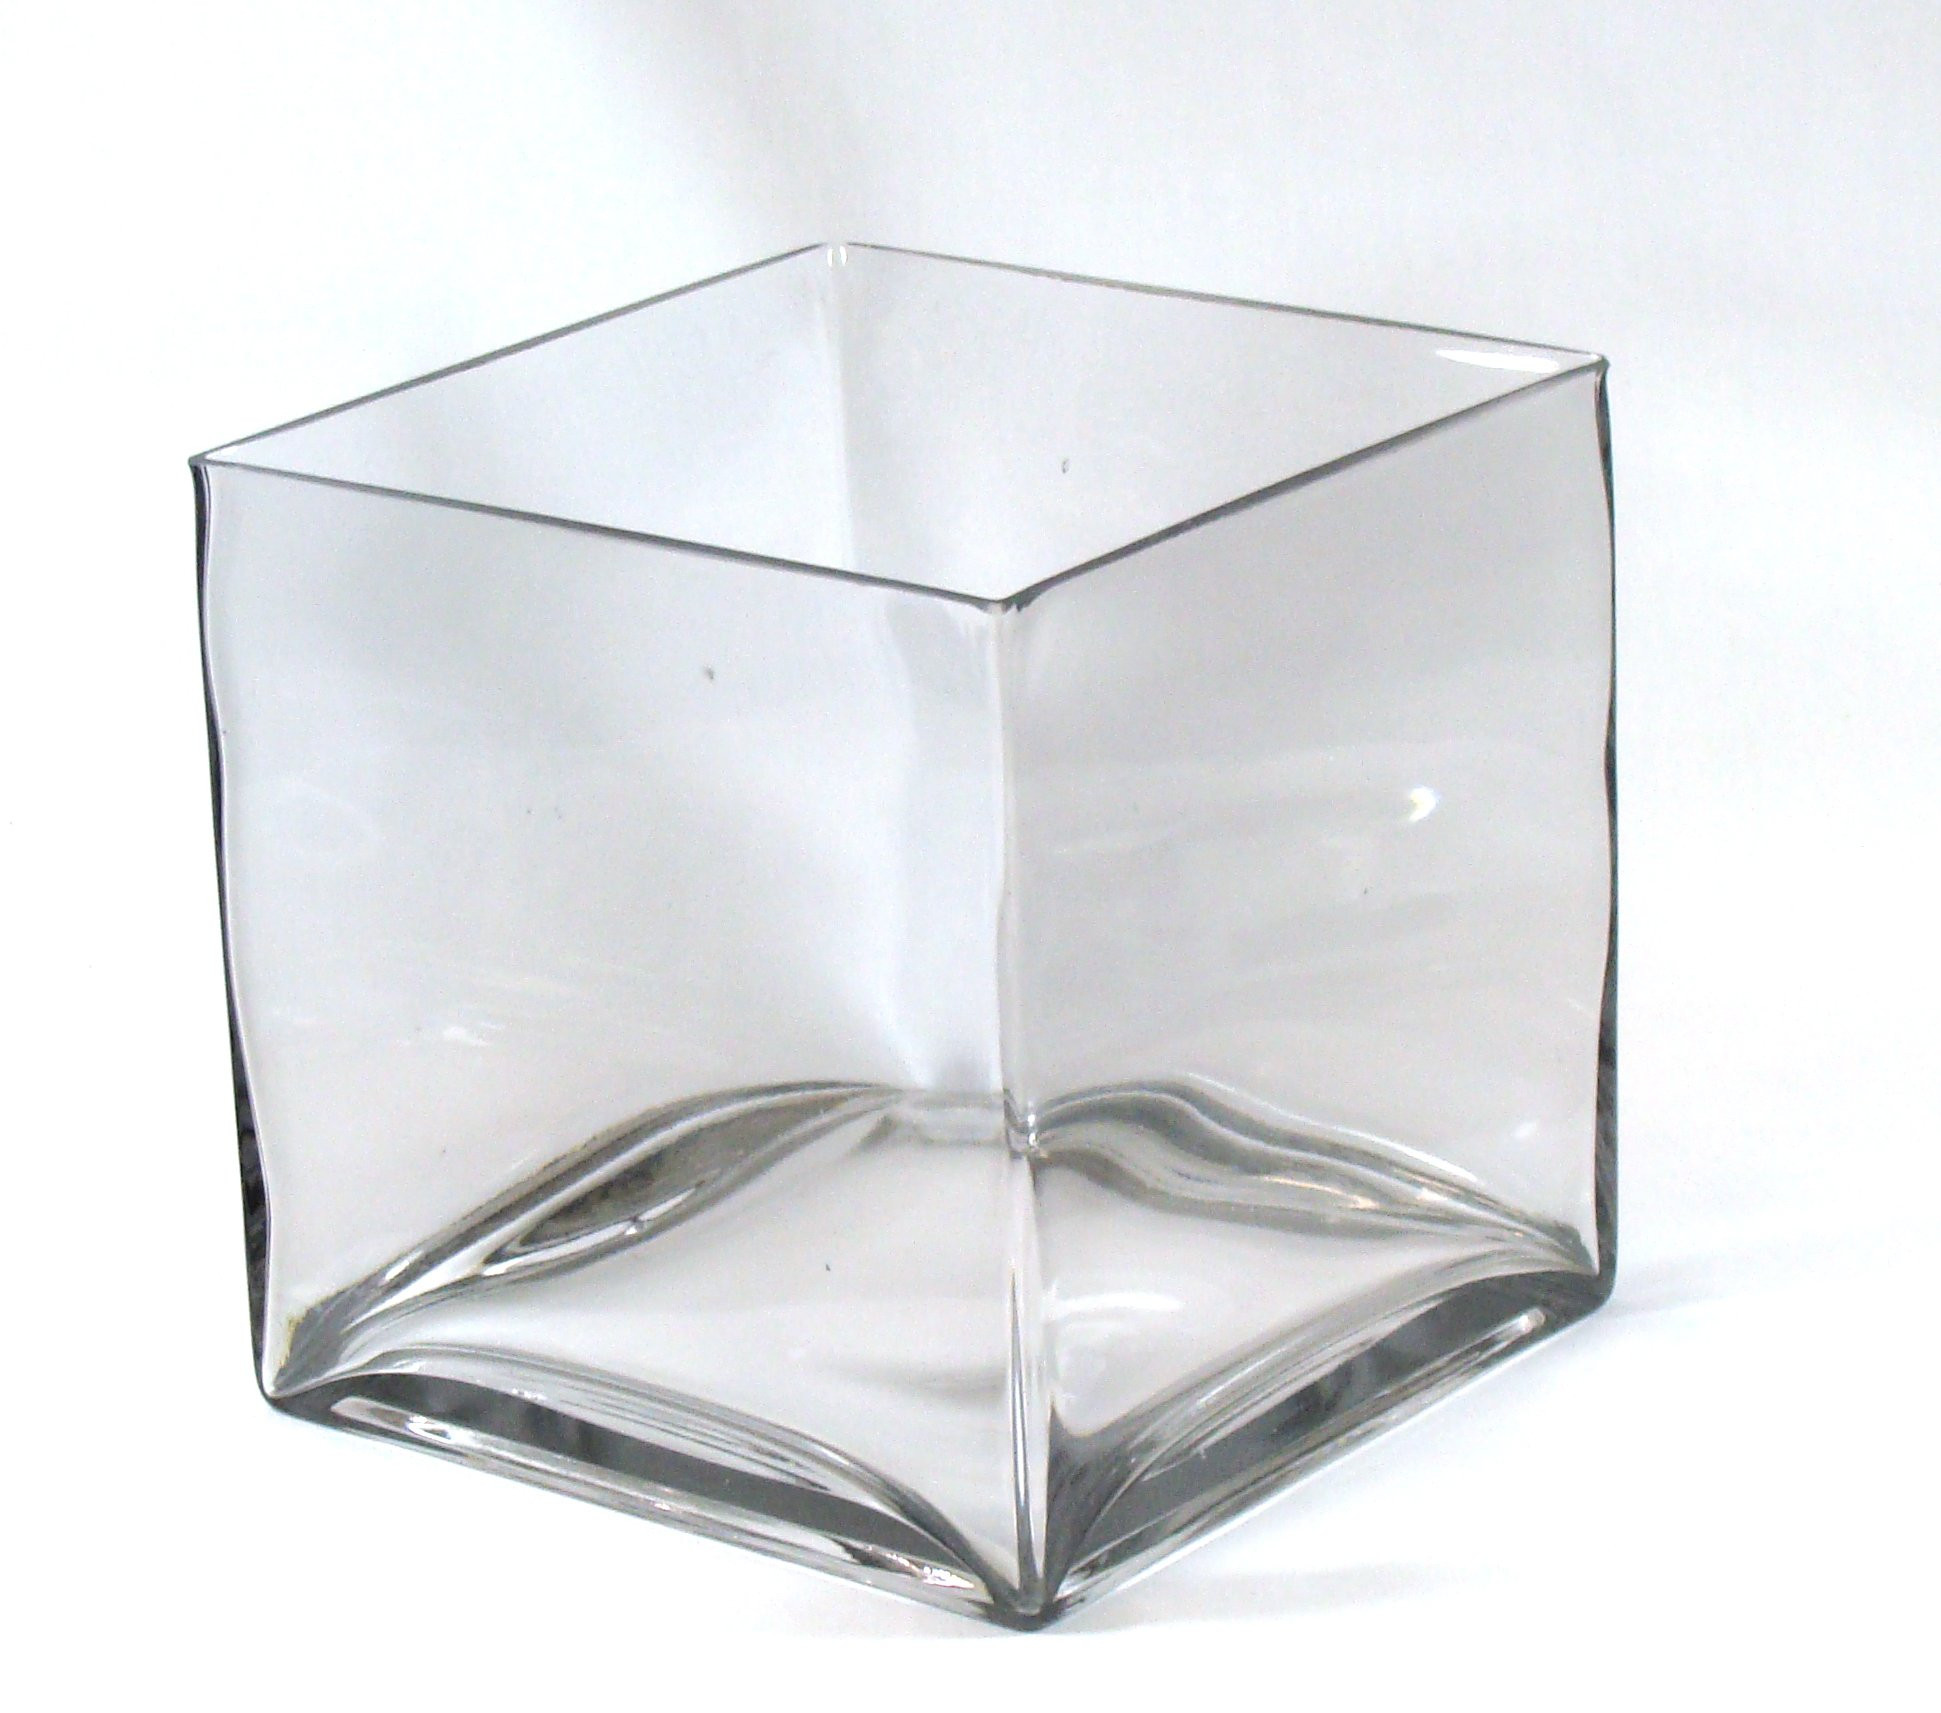 14 Trendy 6 Inch Glass Vase 2024 free download 6 inch glass vase of buy 8 inch round large glass vase 8 clear cylinder oversize inside 8 square large glass vase 8 inch clear cube oversize centerpiece 8x8x8 candleholder